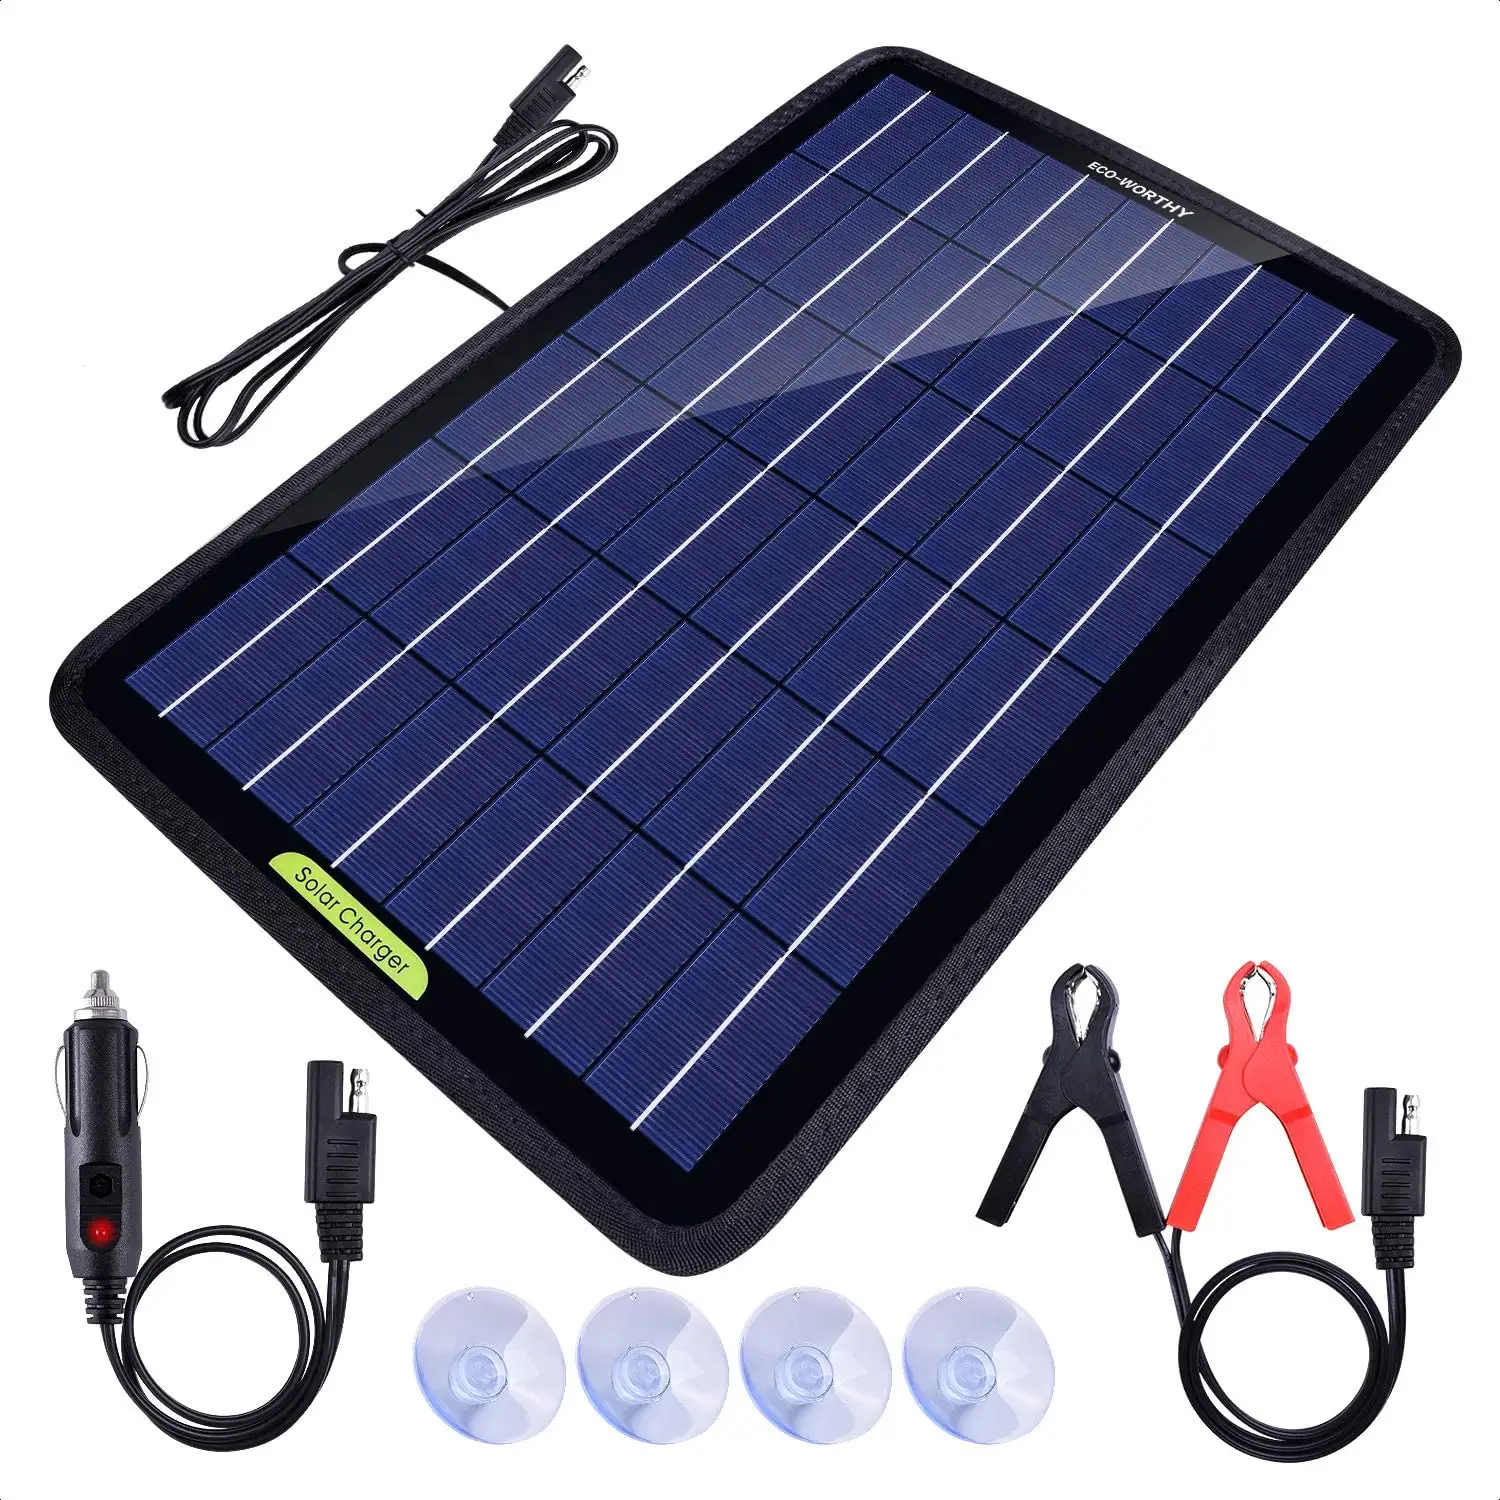 12V 10W Solar Car Battery Charger Zonnepaneel Trickle Charger, draagbare Power Backup Met Alligator Clip Adapter Voor Auto Boot